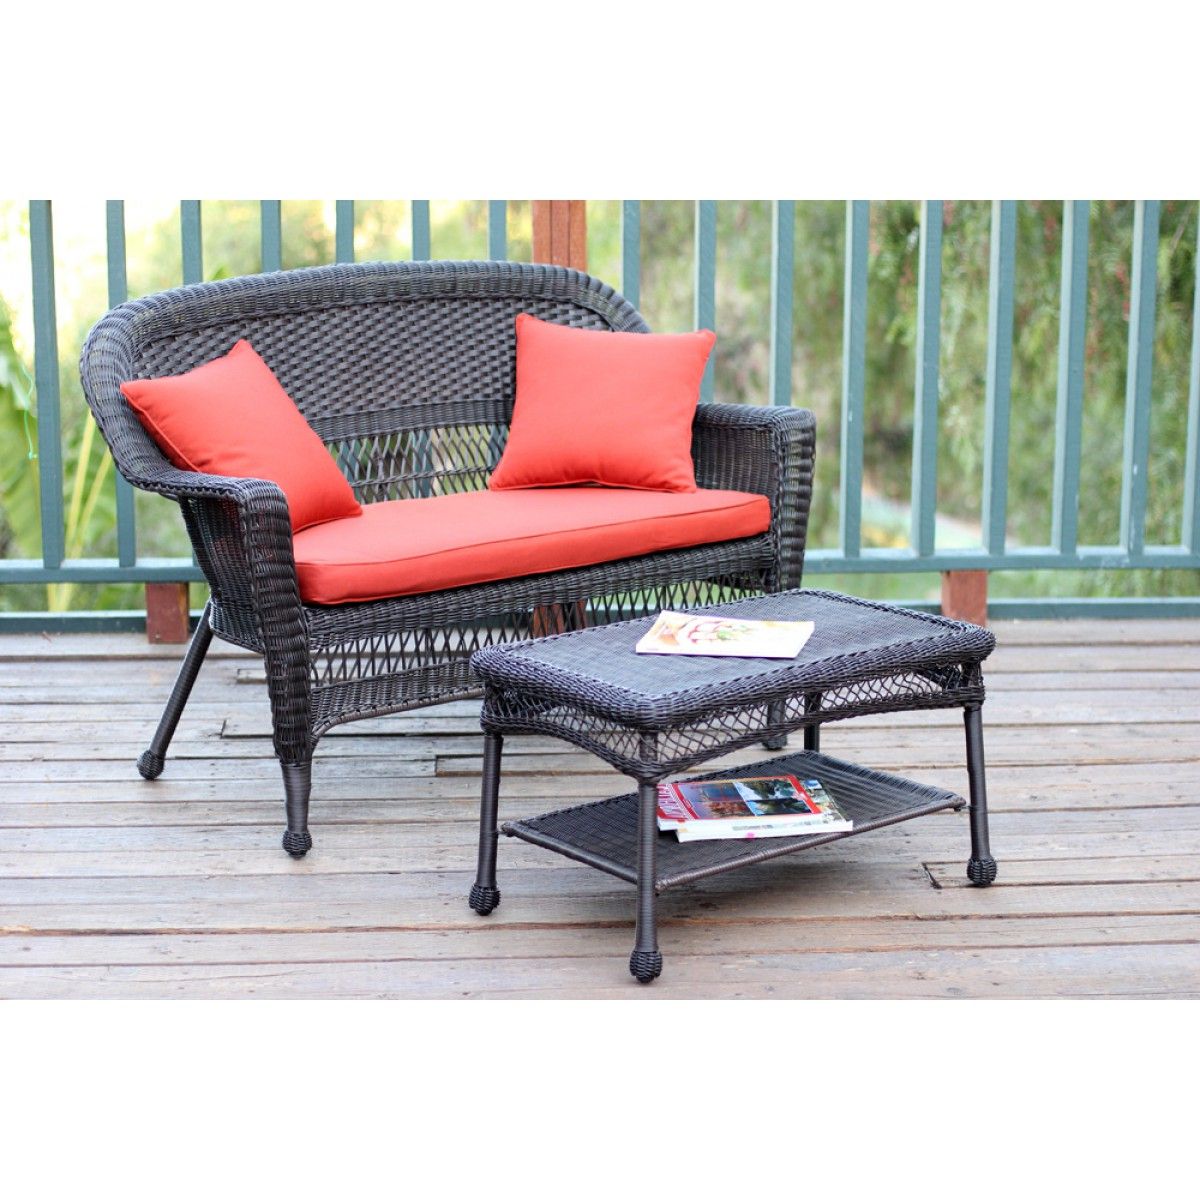 Newest Black And Tan Rattan Coffee Tables In Espresso Wicker Patio Love Seat And Coffee Table Set With (View 4 of 20)